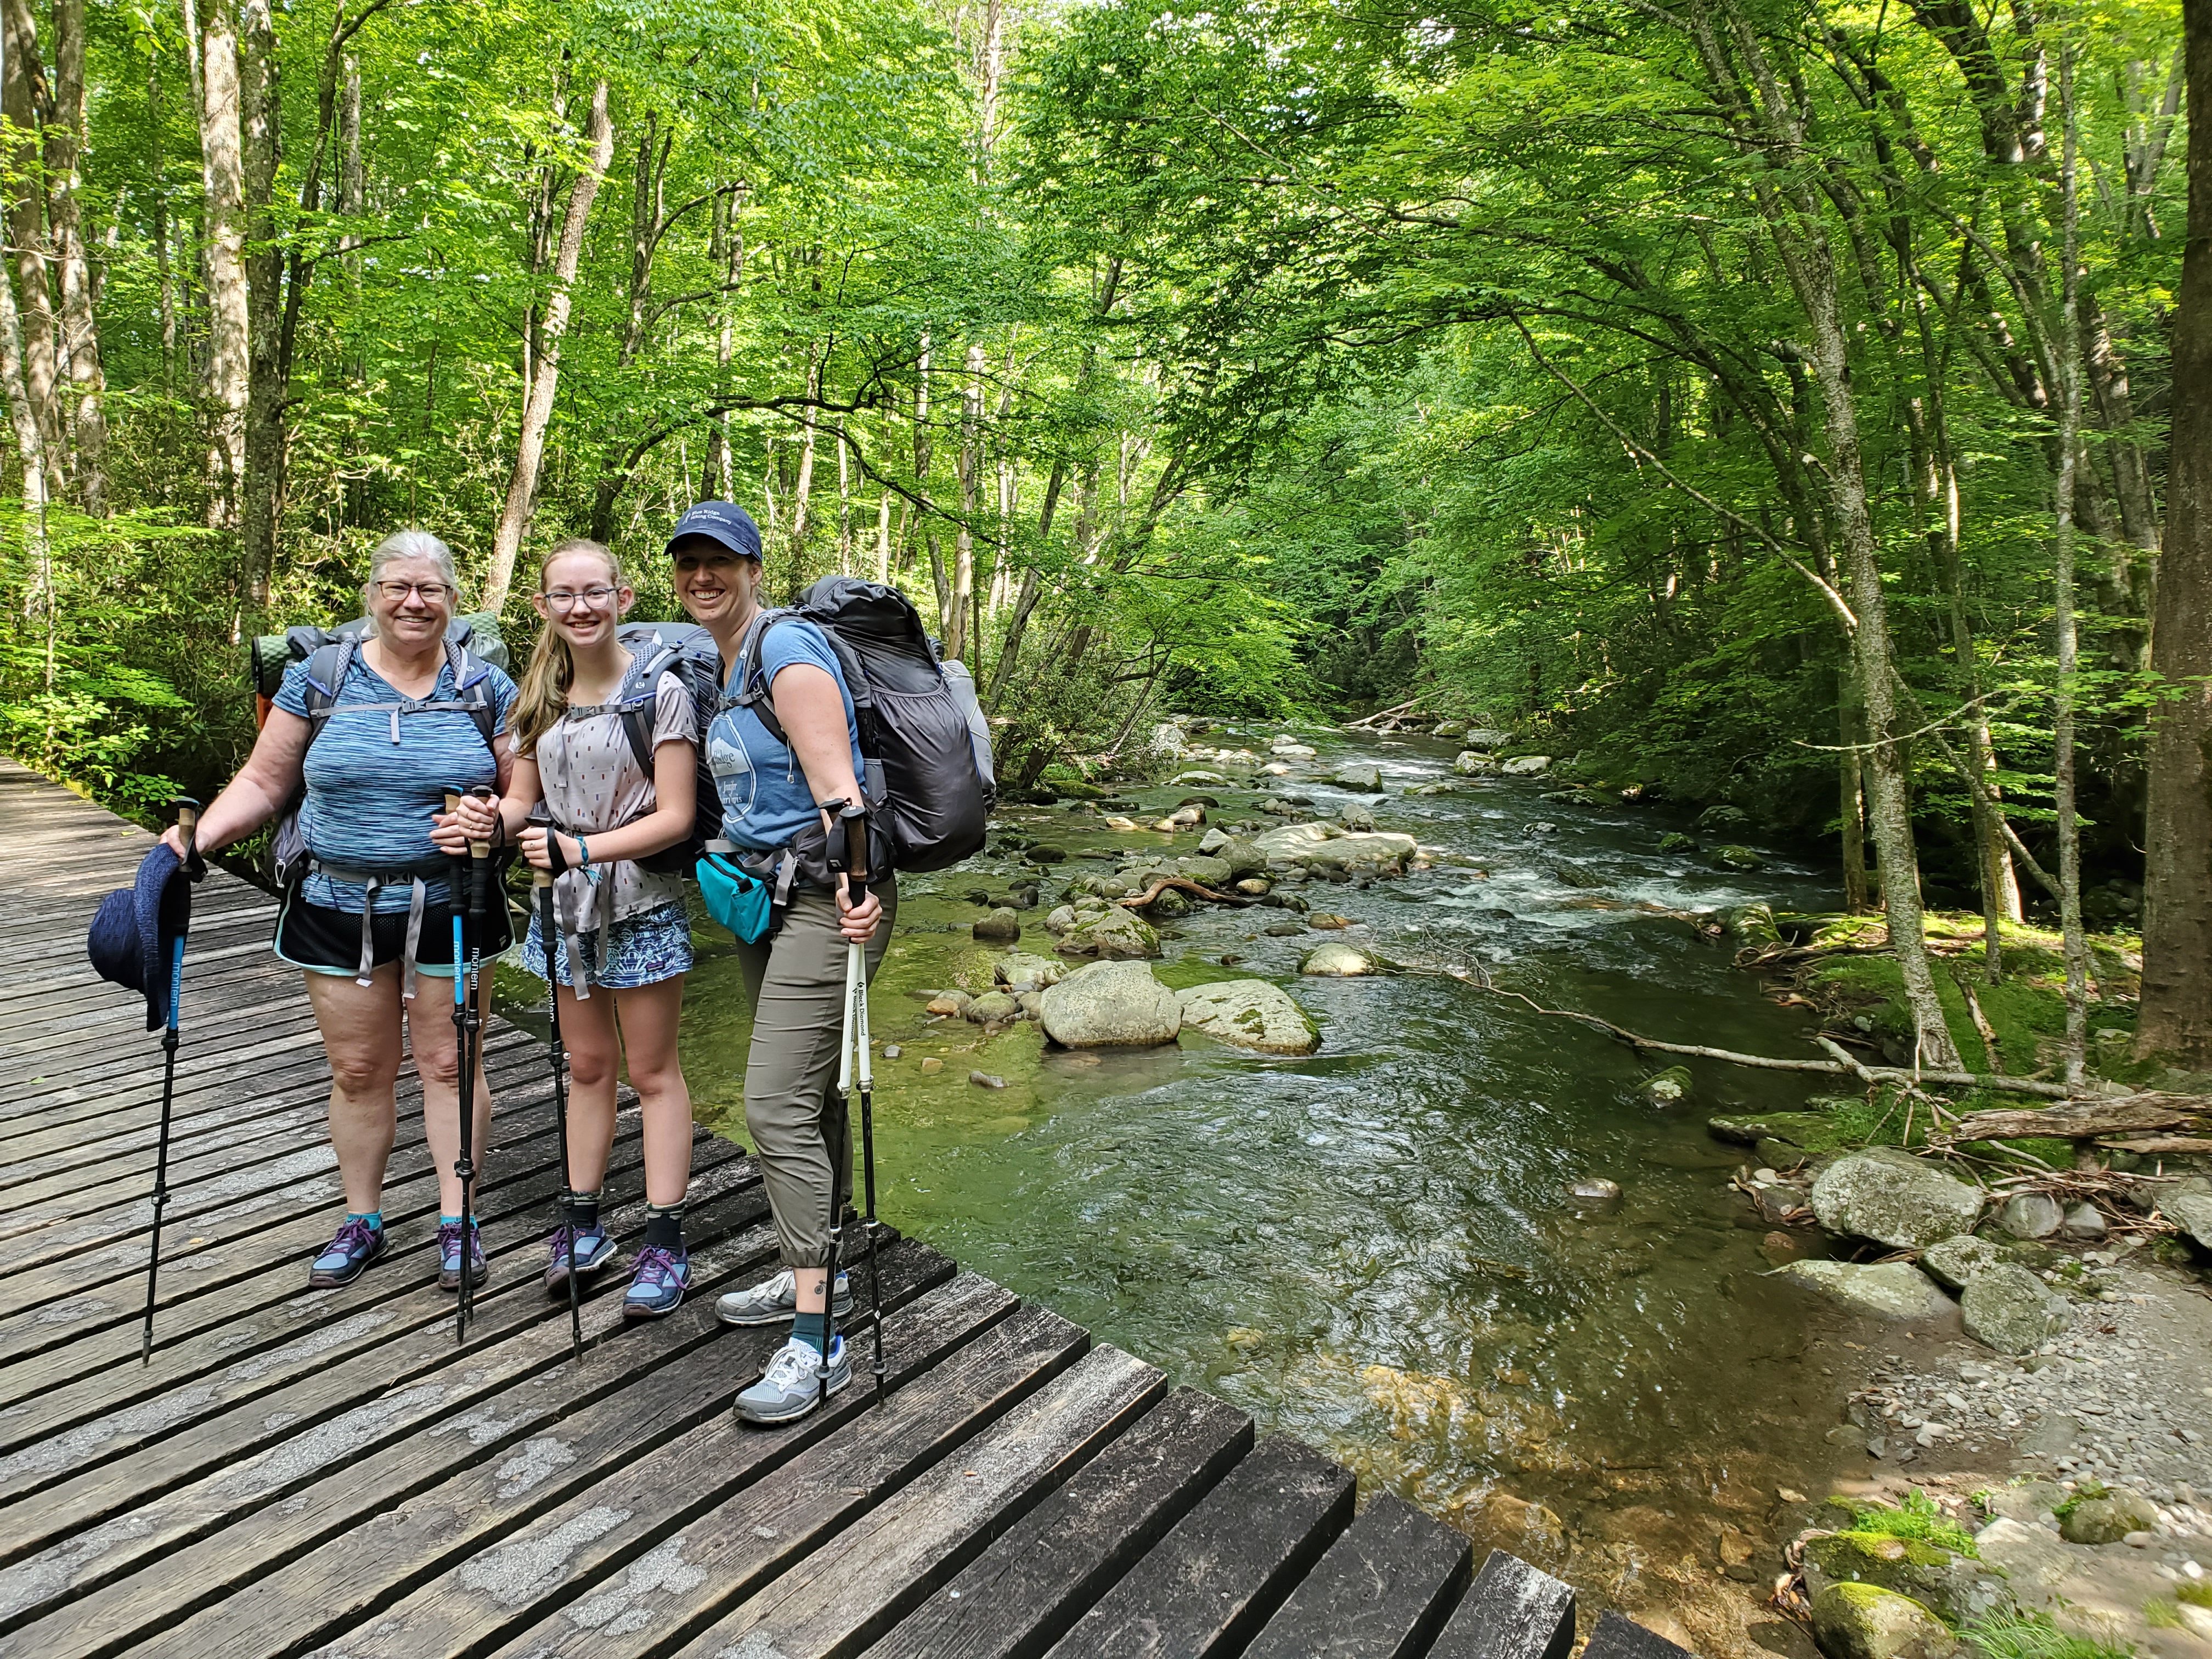 Hiking The Appalachian Trail: 15 Tips for a First-Timer